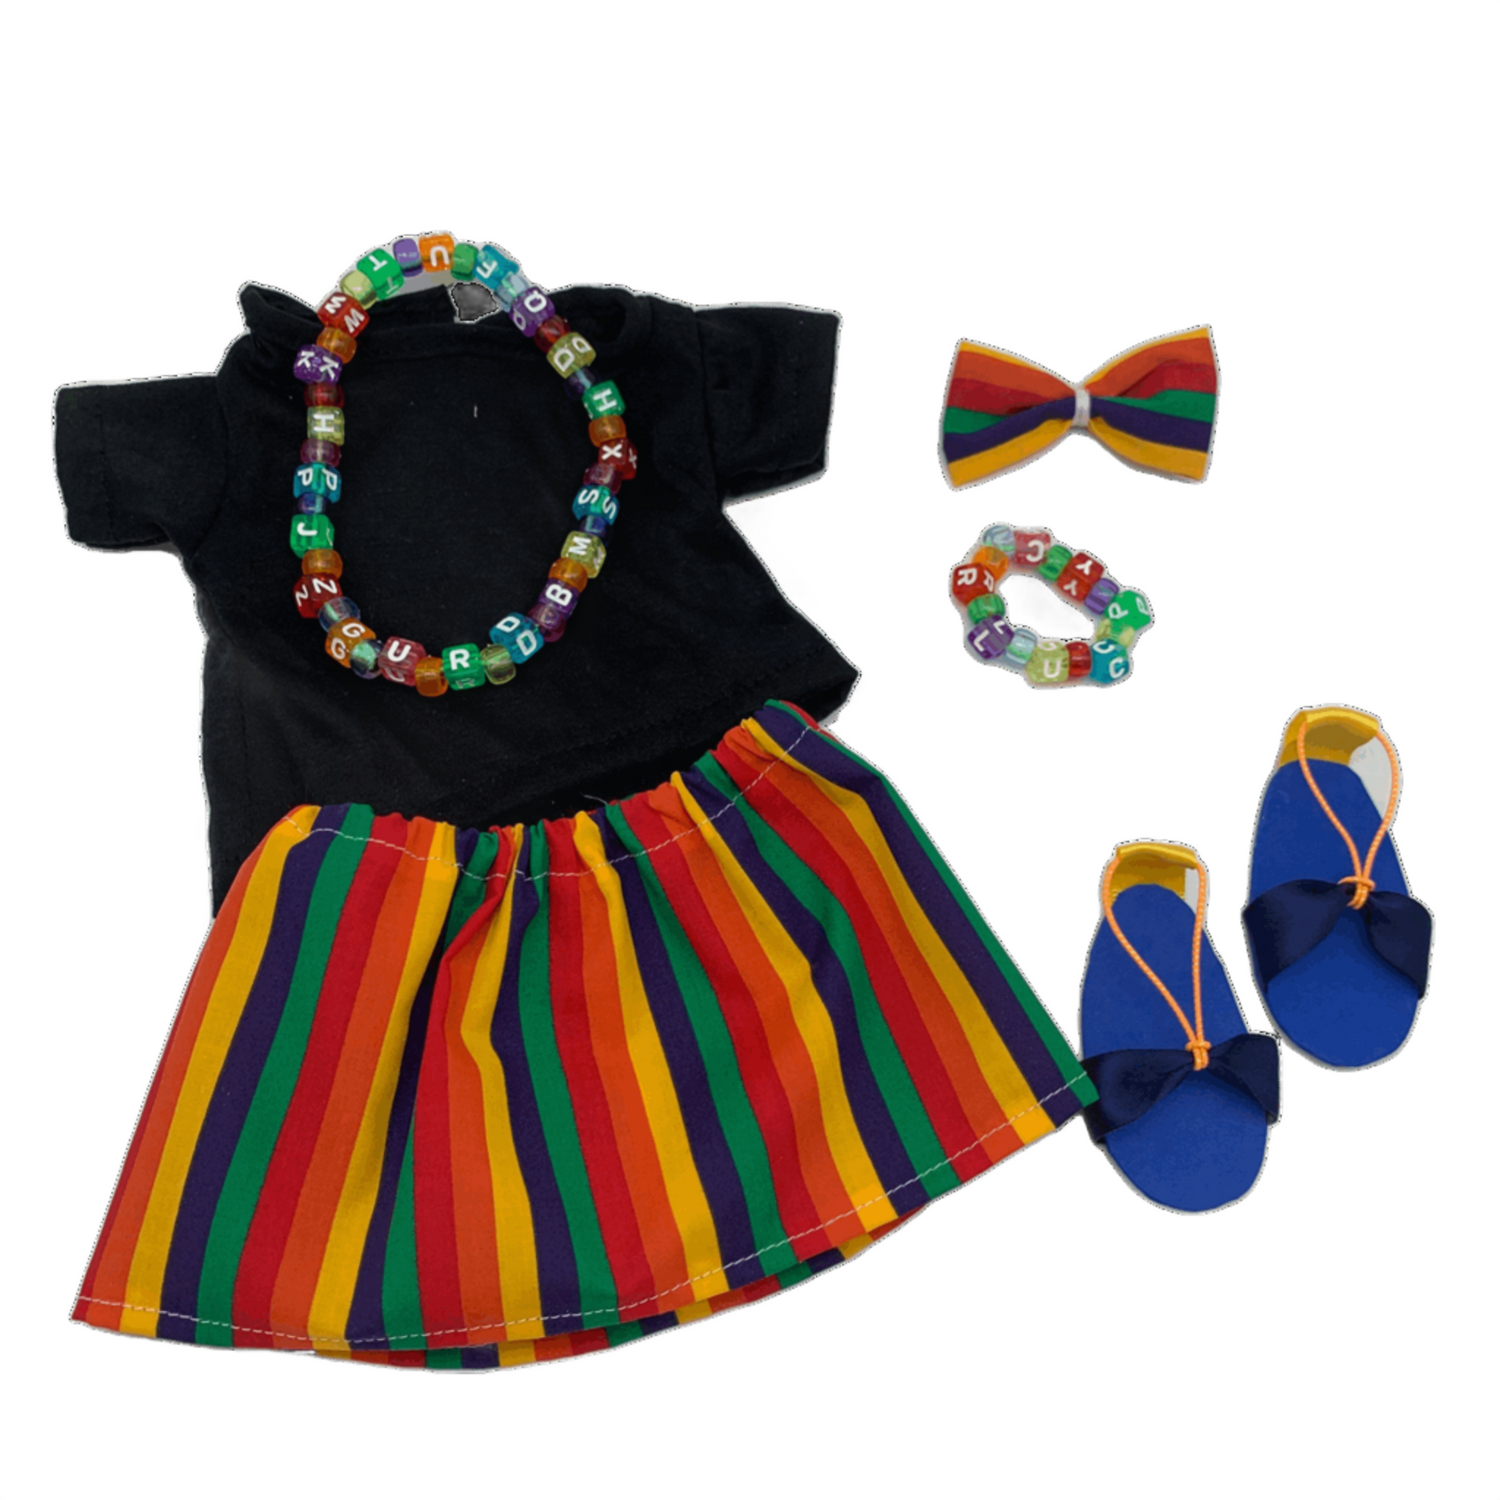 Clothing for your 18 inch Doll fits American Girl and My Generation Clothes Shirt Skirt Shoes Necklace Bracelet Hairbow